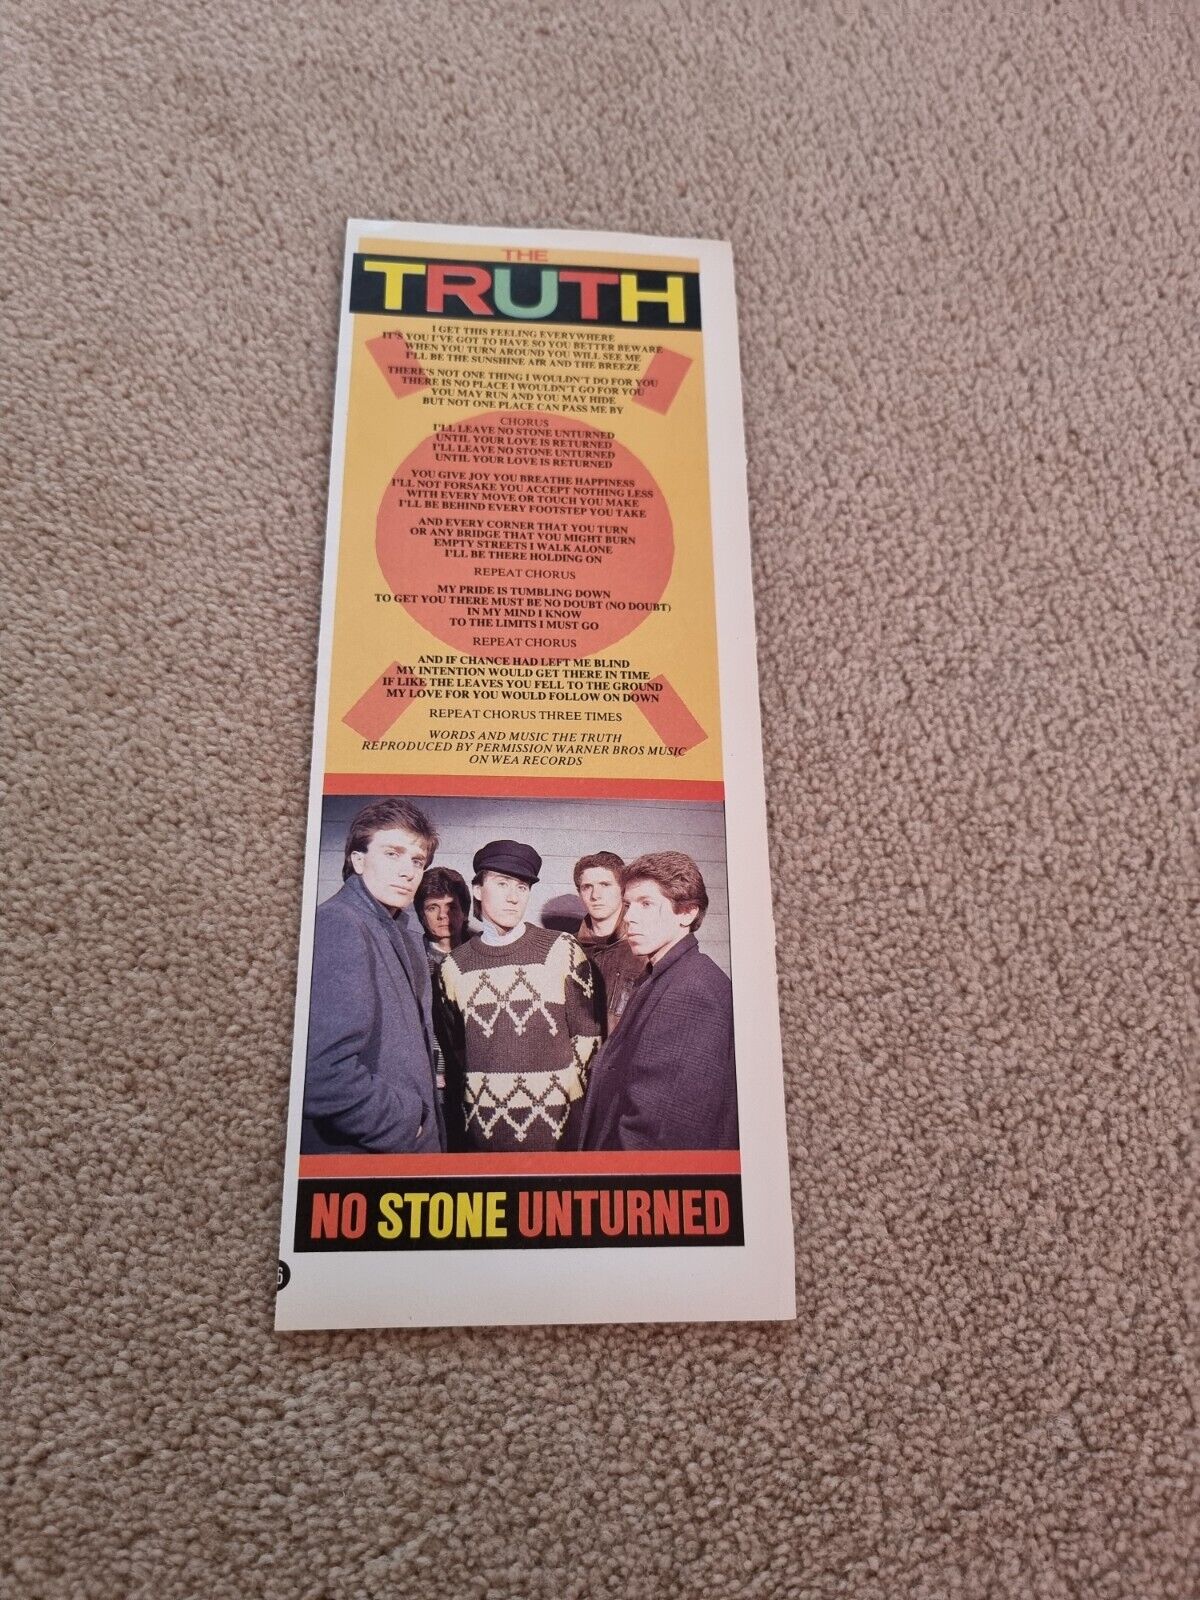 TNEWL70 ADVERT 11X4 THE TRUTH : \'NO STONE UNTURNED\' SONG WORDS